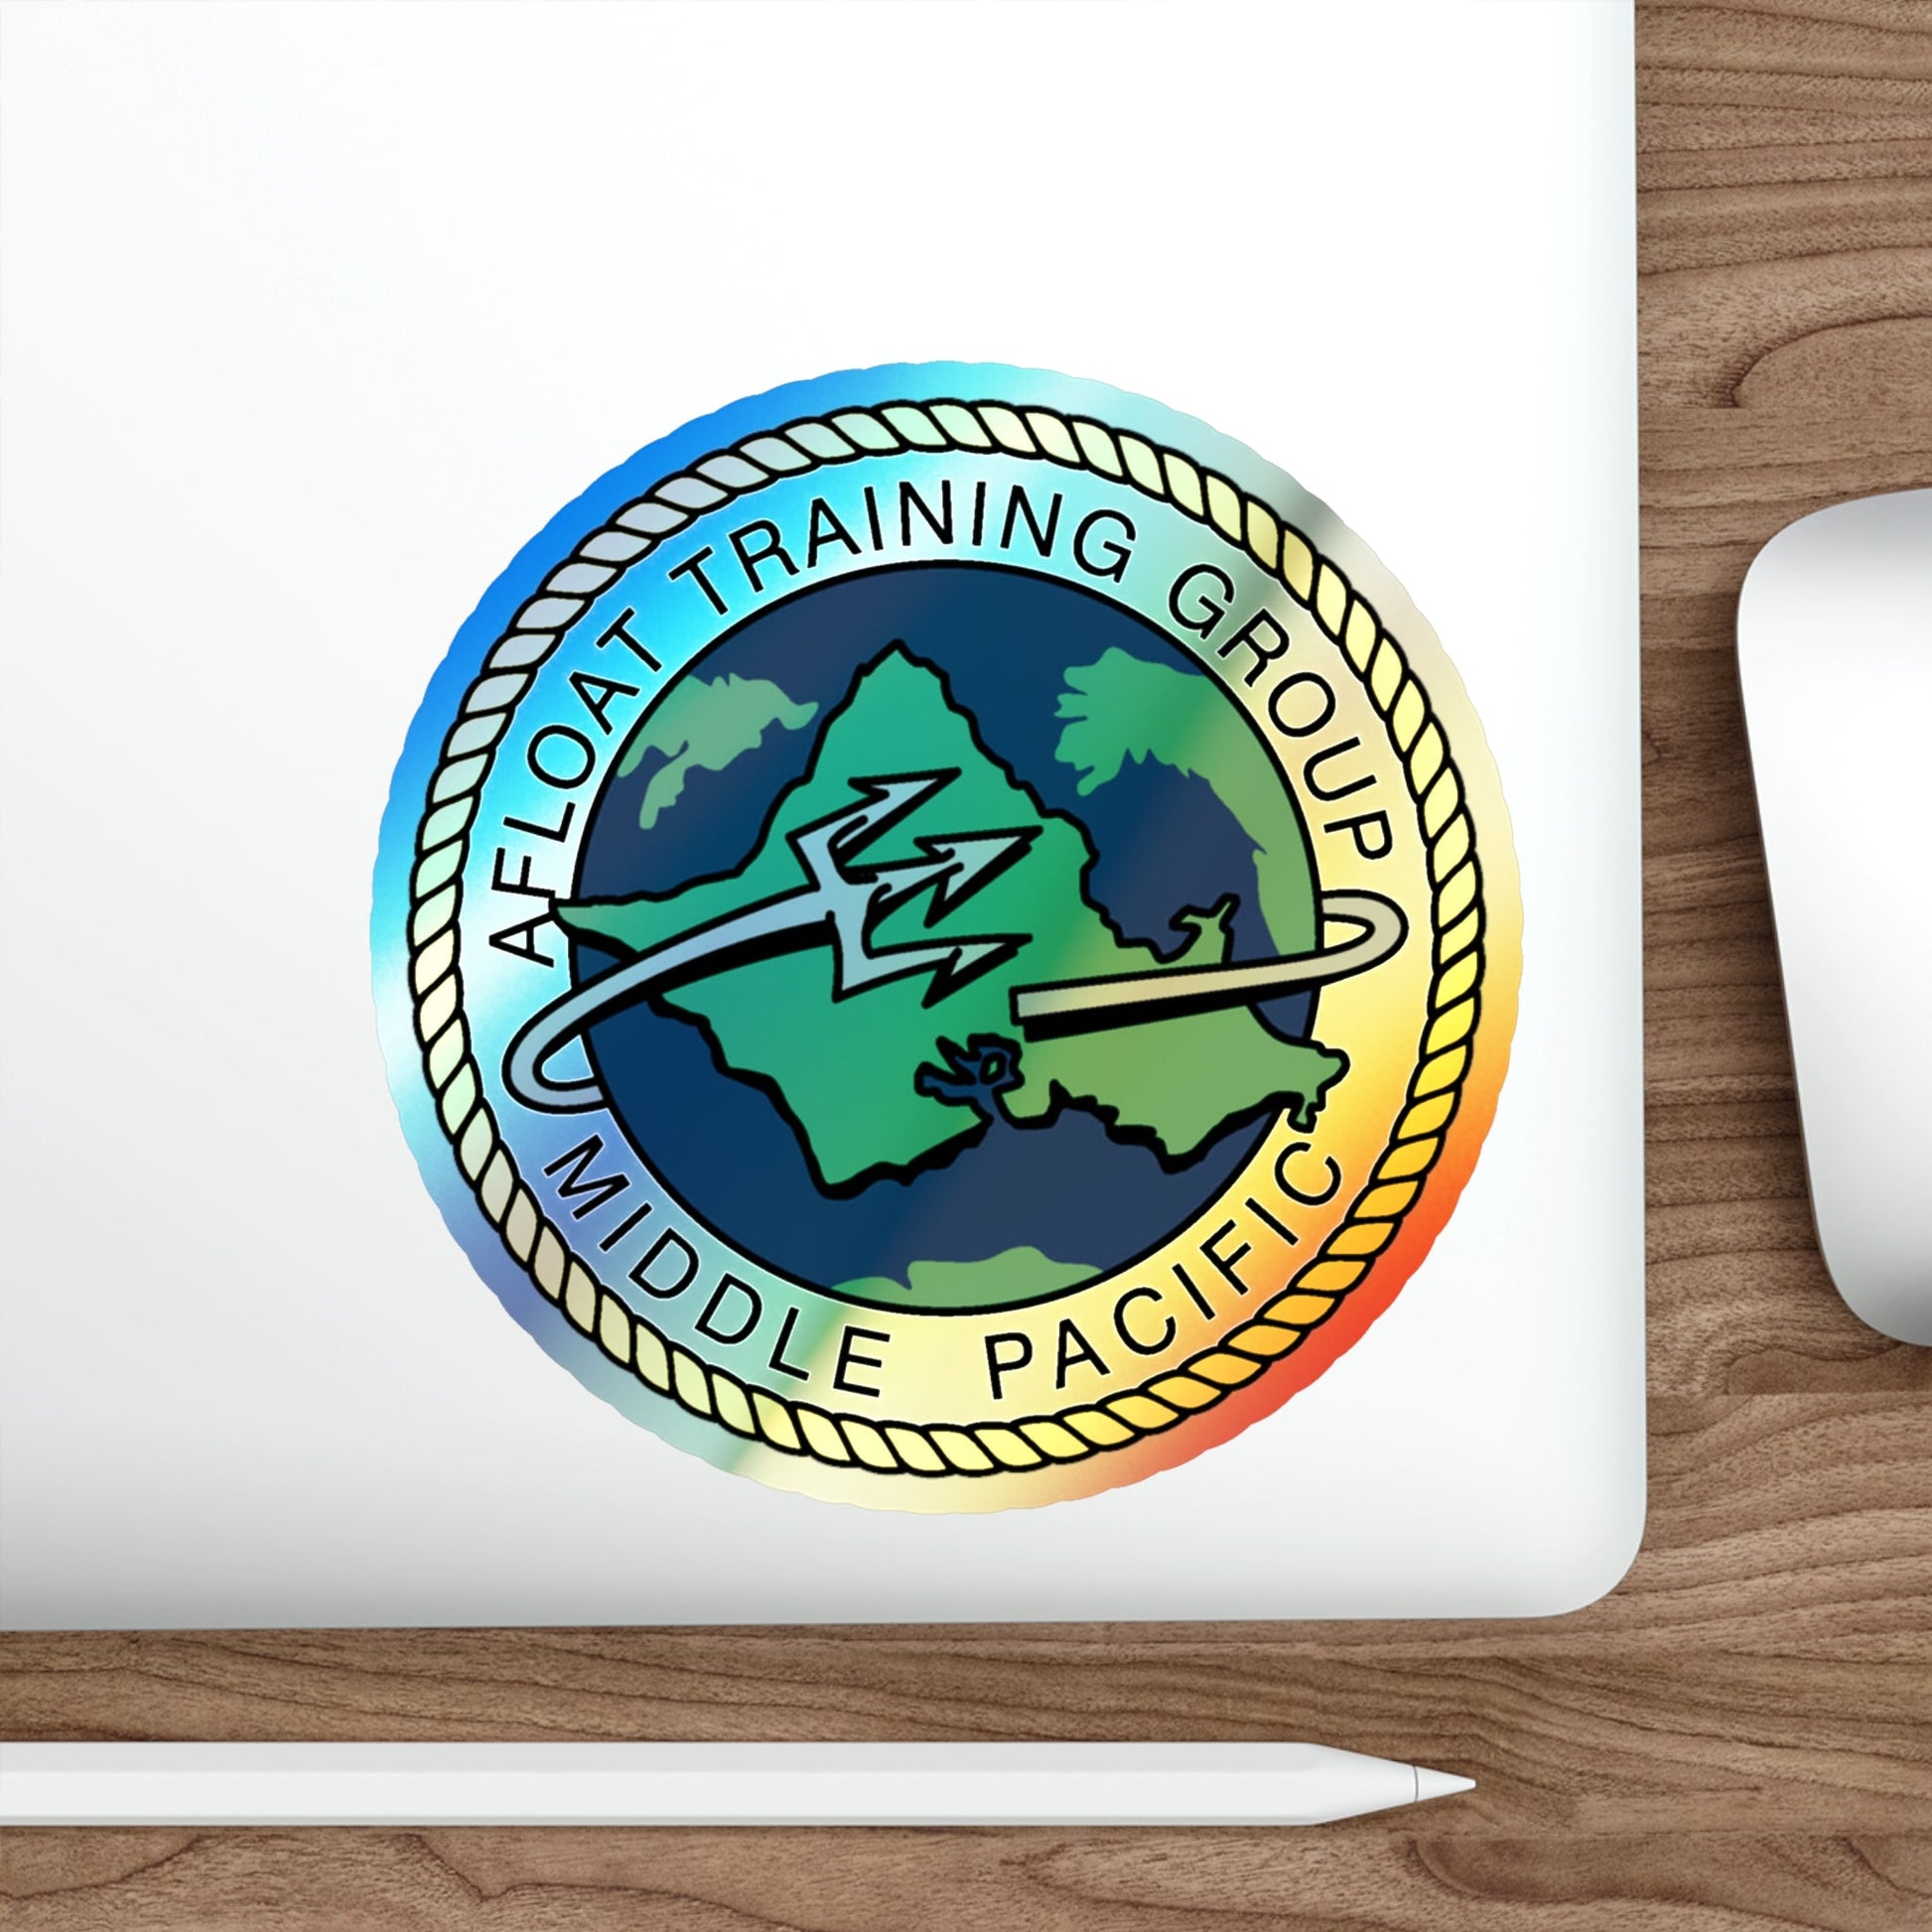 AFLOAT Training Group MID PACIFIC (U.S. Navy) Holographic STICKER Die-Cut Vinyl Decal-The Sticker Space